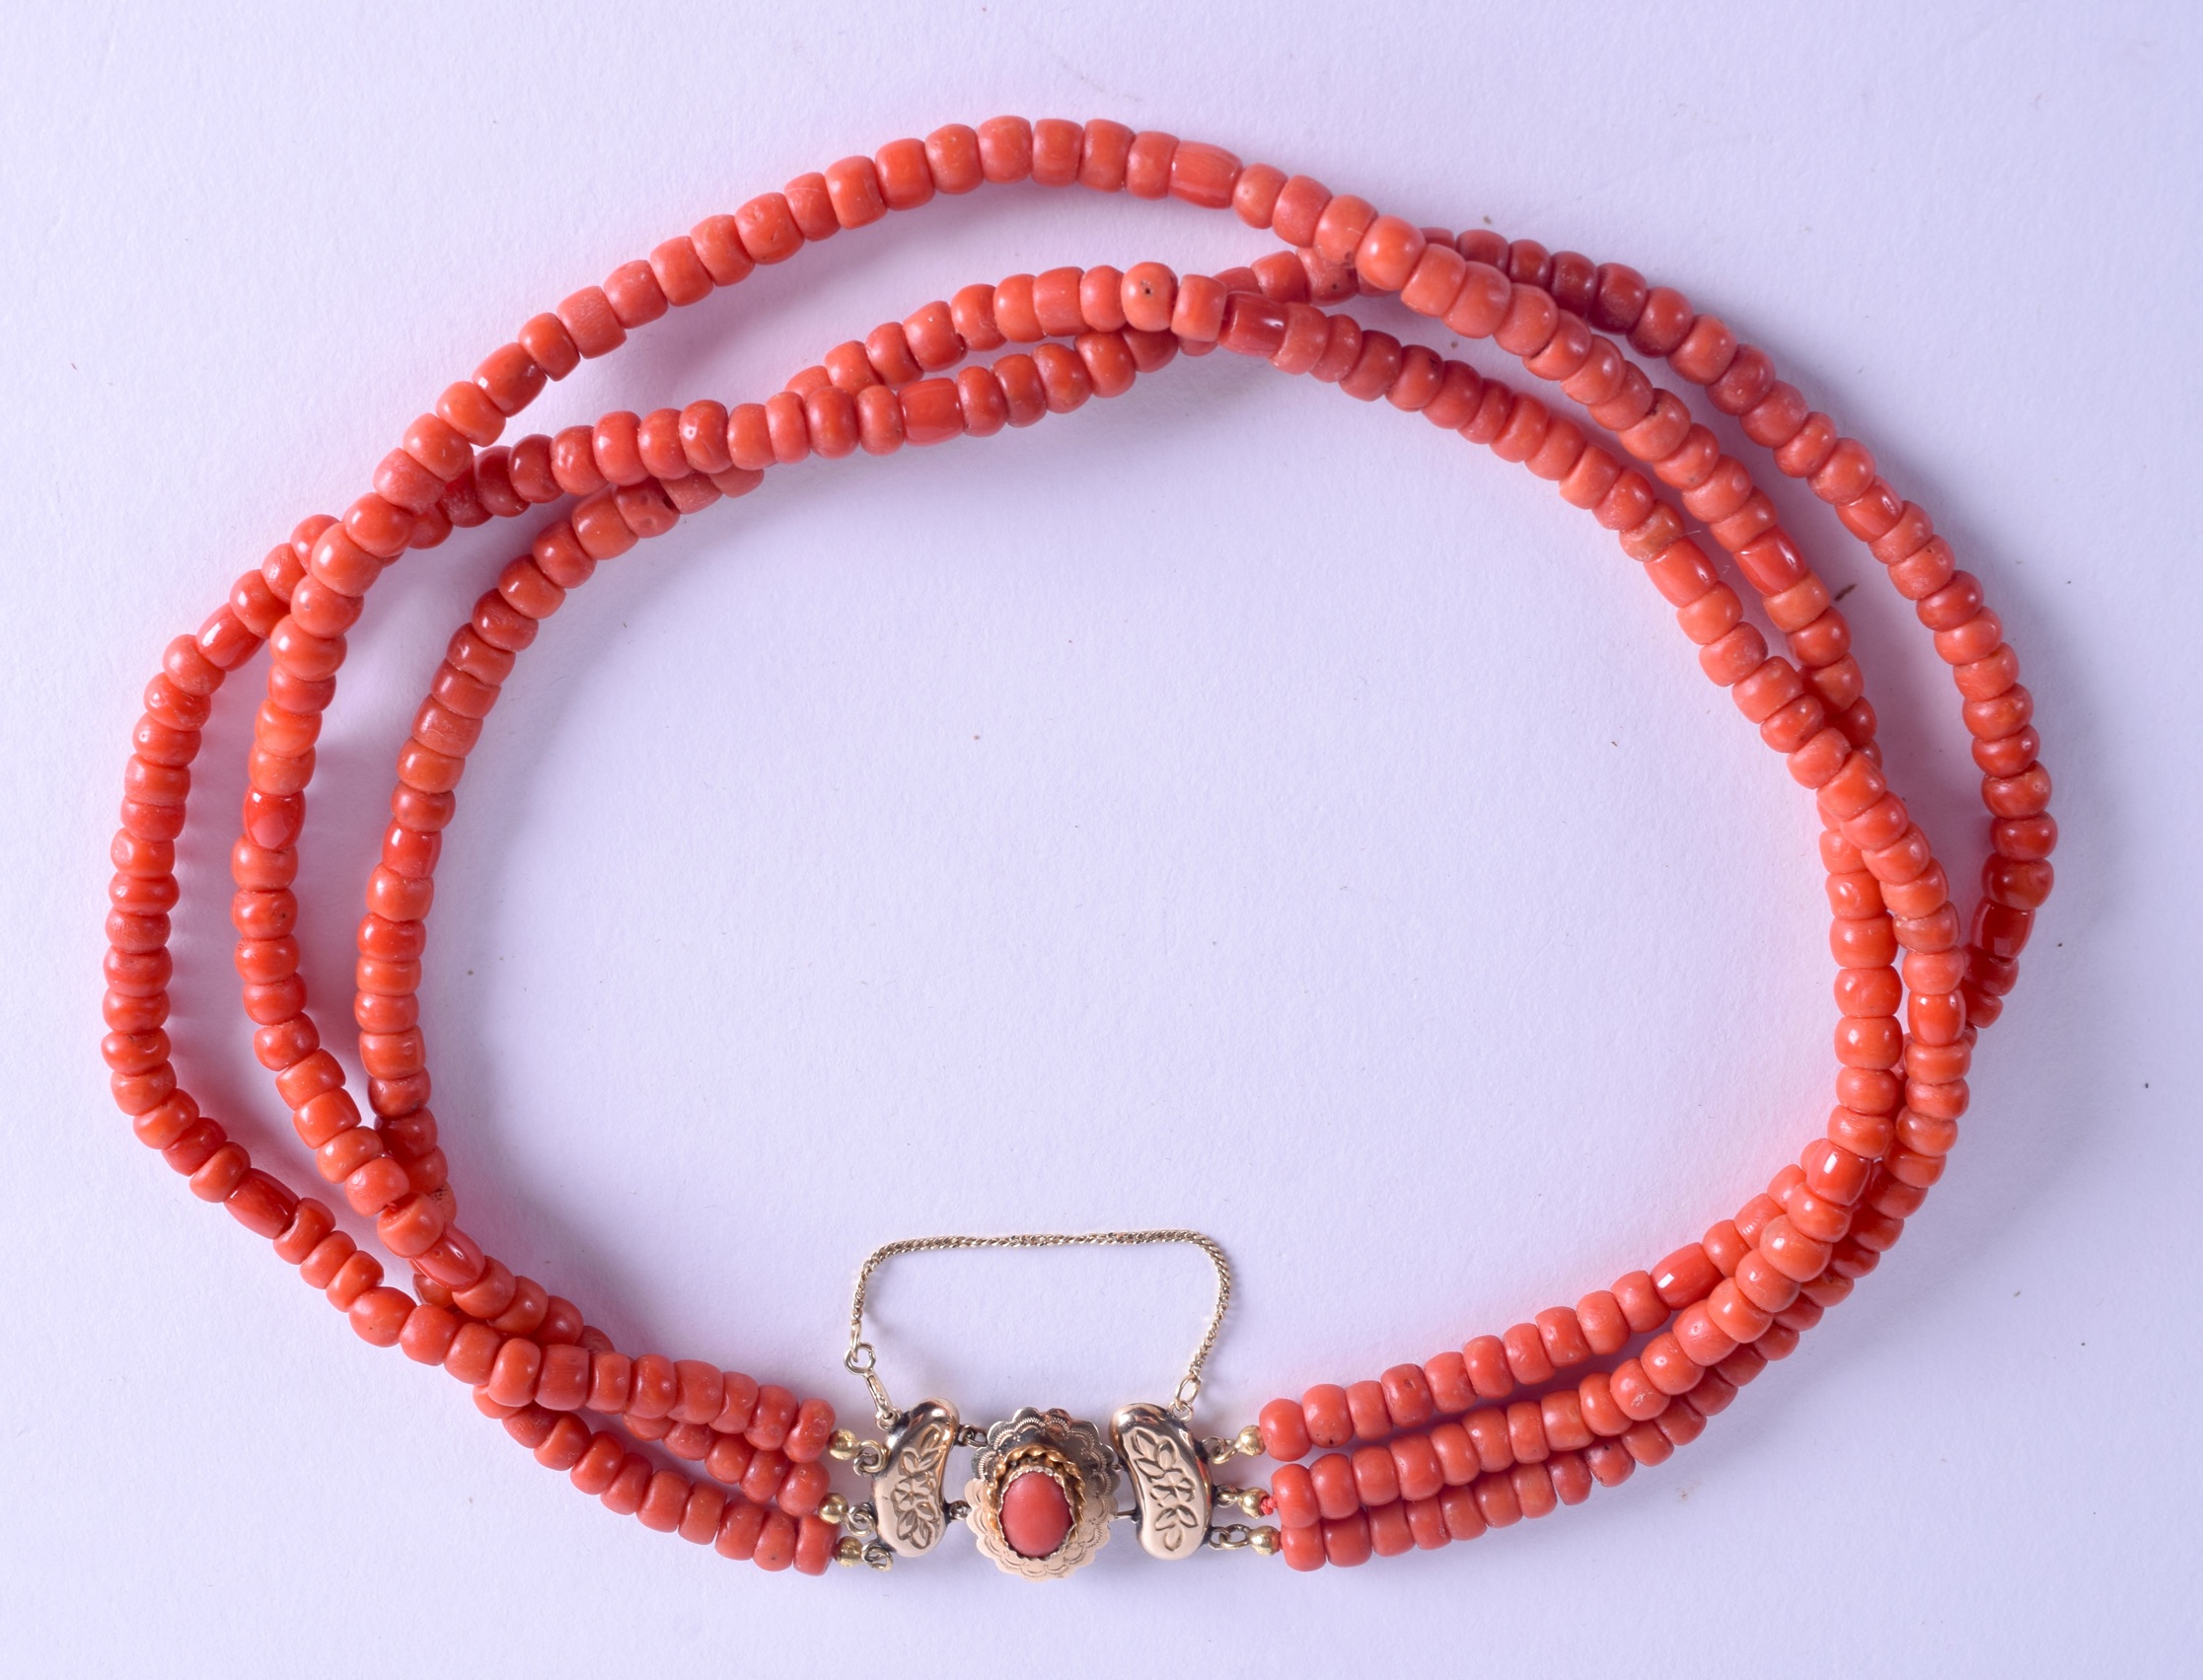 AN 18CT GOLD MOUNTED CORAL NECKLACE. 700 grams. Each strand 40 cm long, each bead 0.3 mm wide.